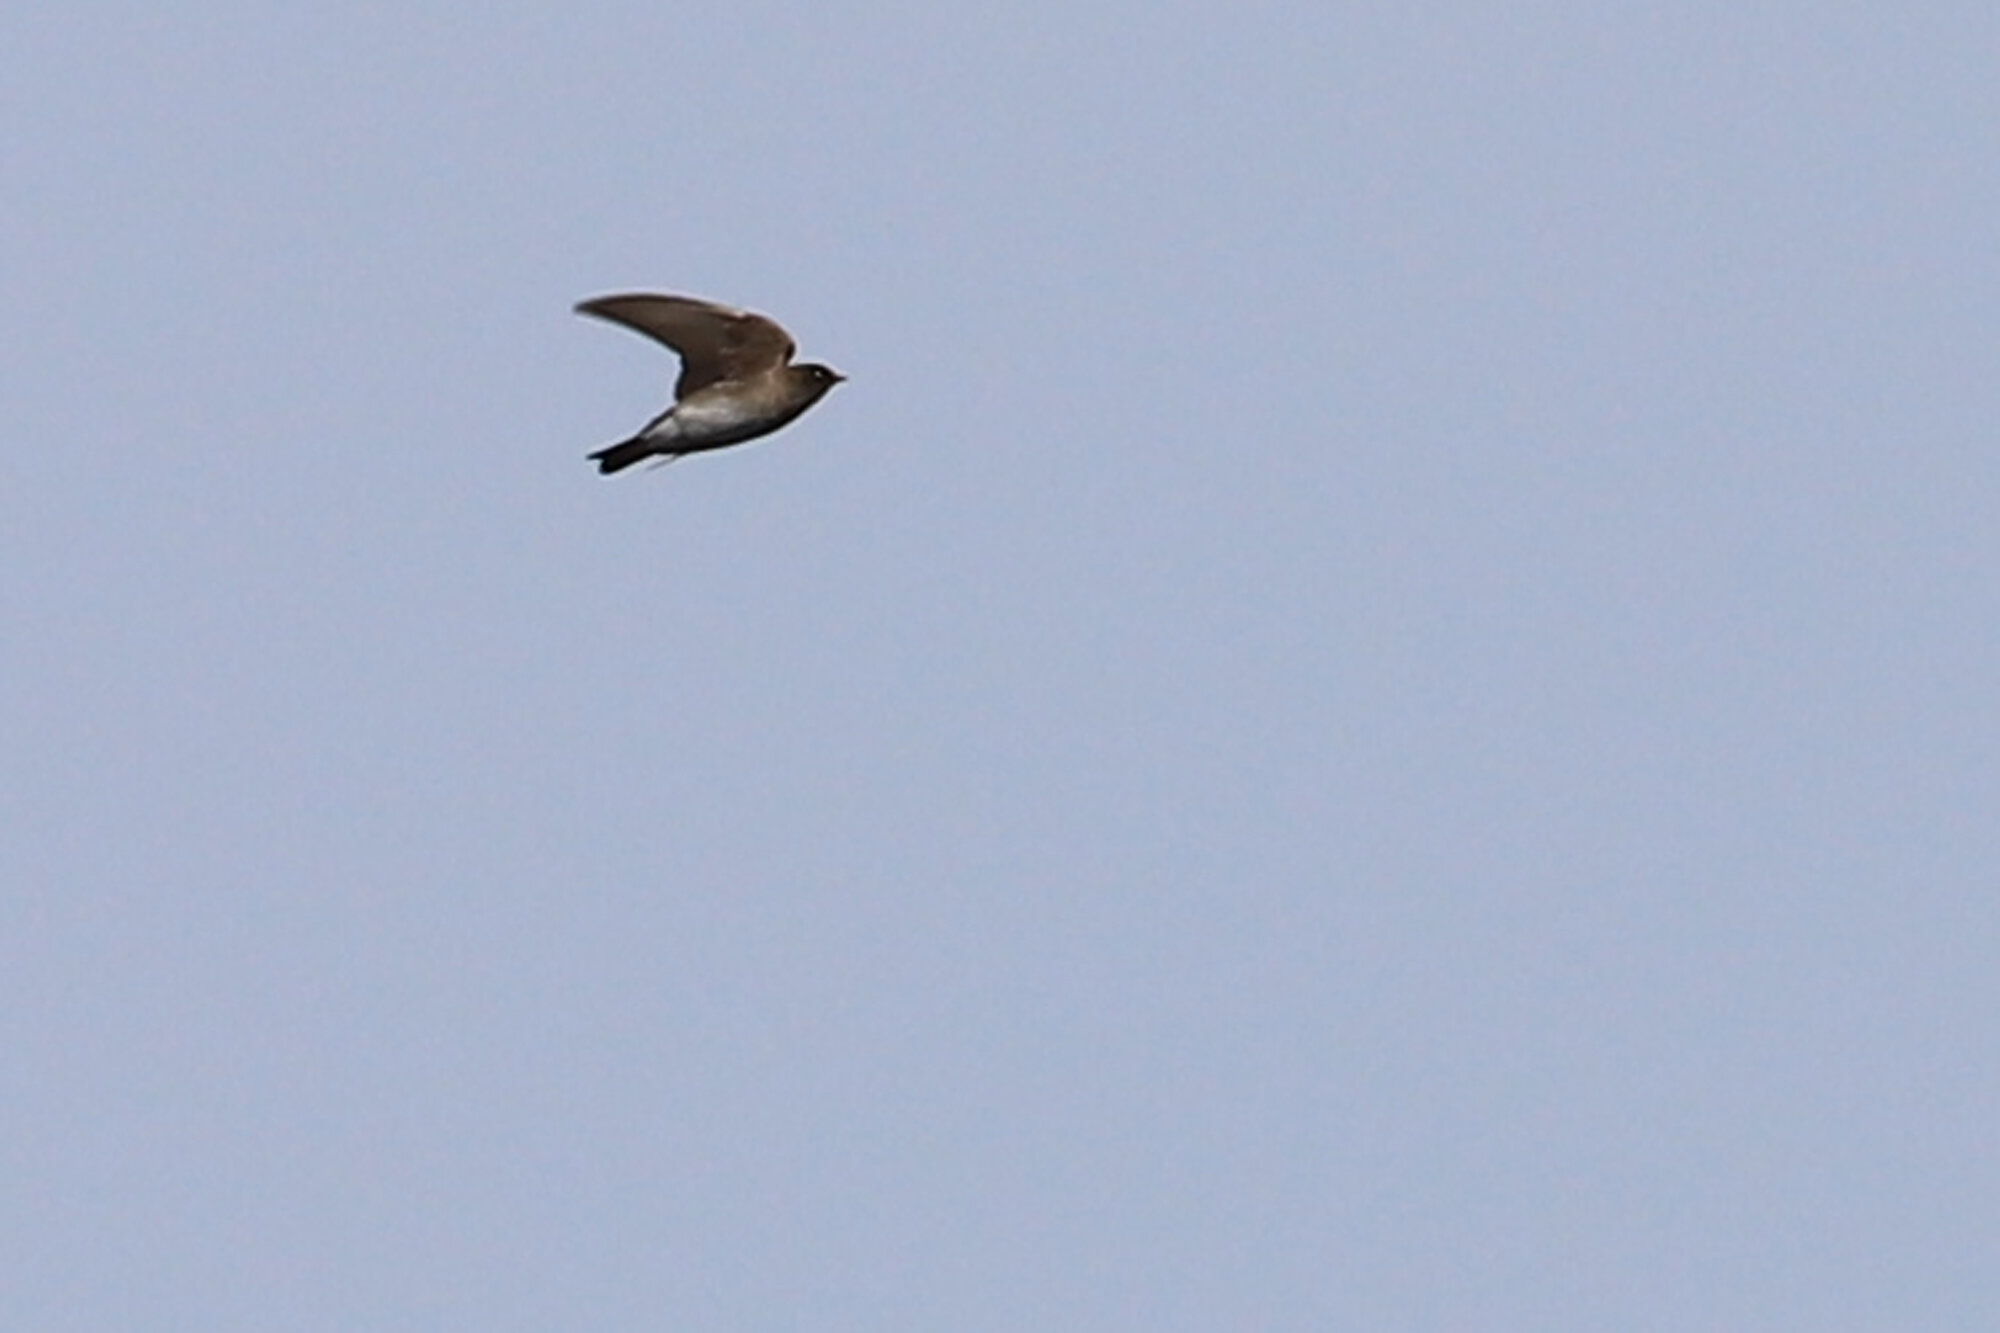  Northern Rough-winged Swallow / NAS Oceana (Restricted) / 14 Mar 